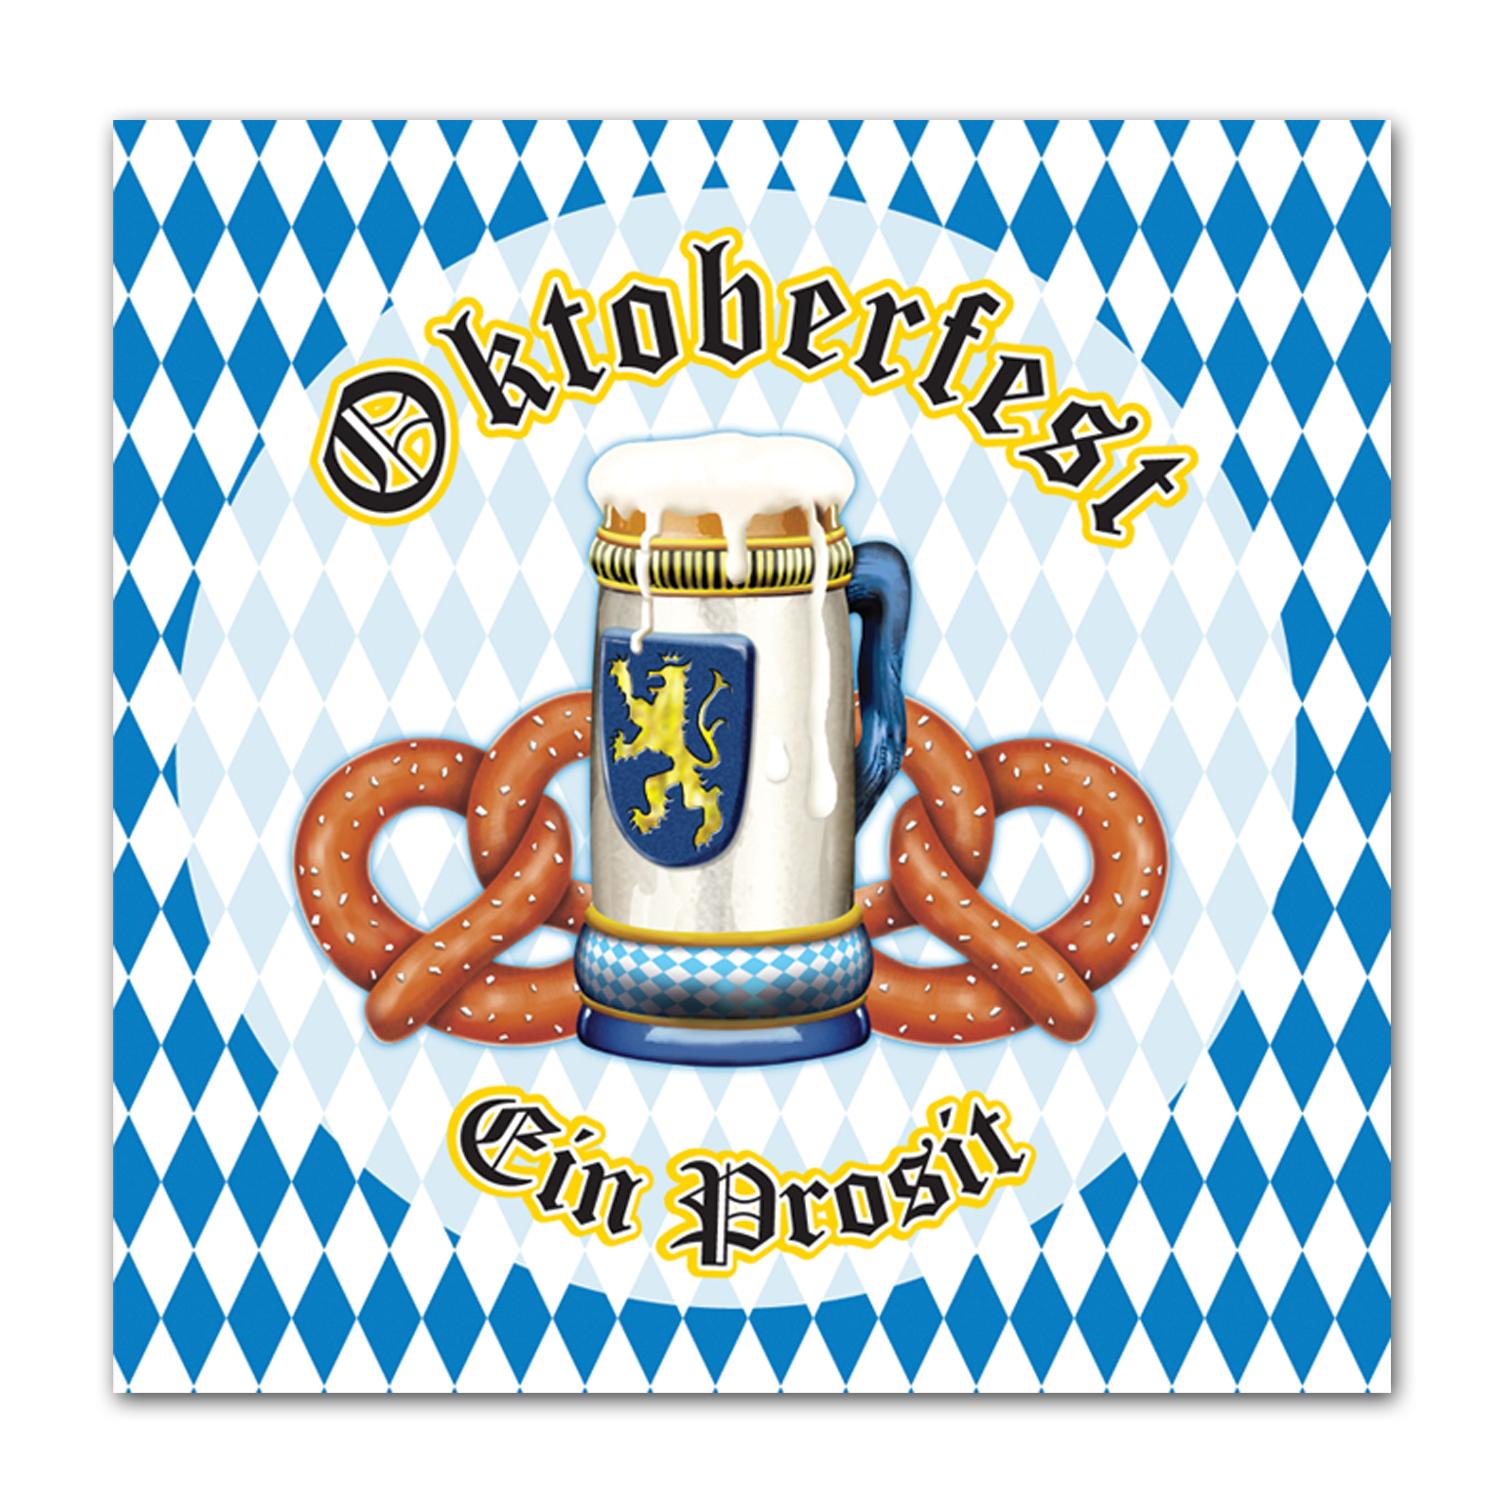 Oktoberfest Party Party Decorations and Stuff to Wear sold in Bulk ...